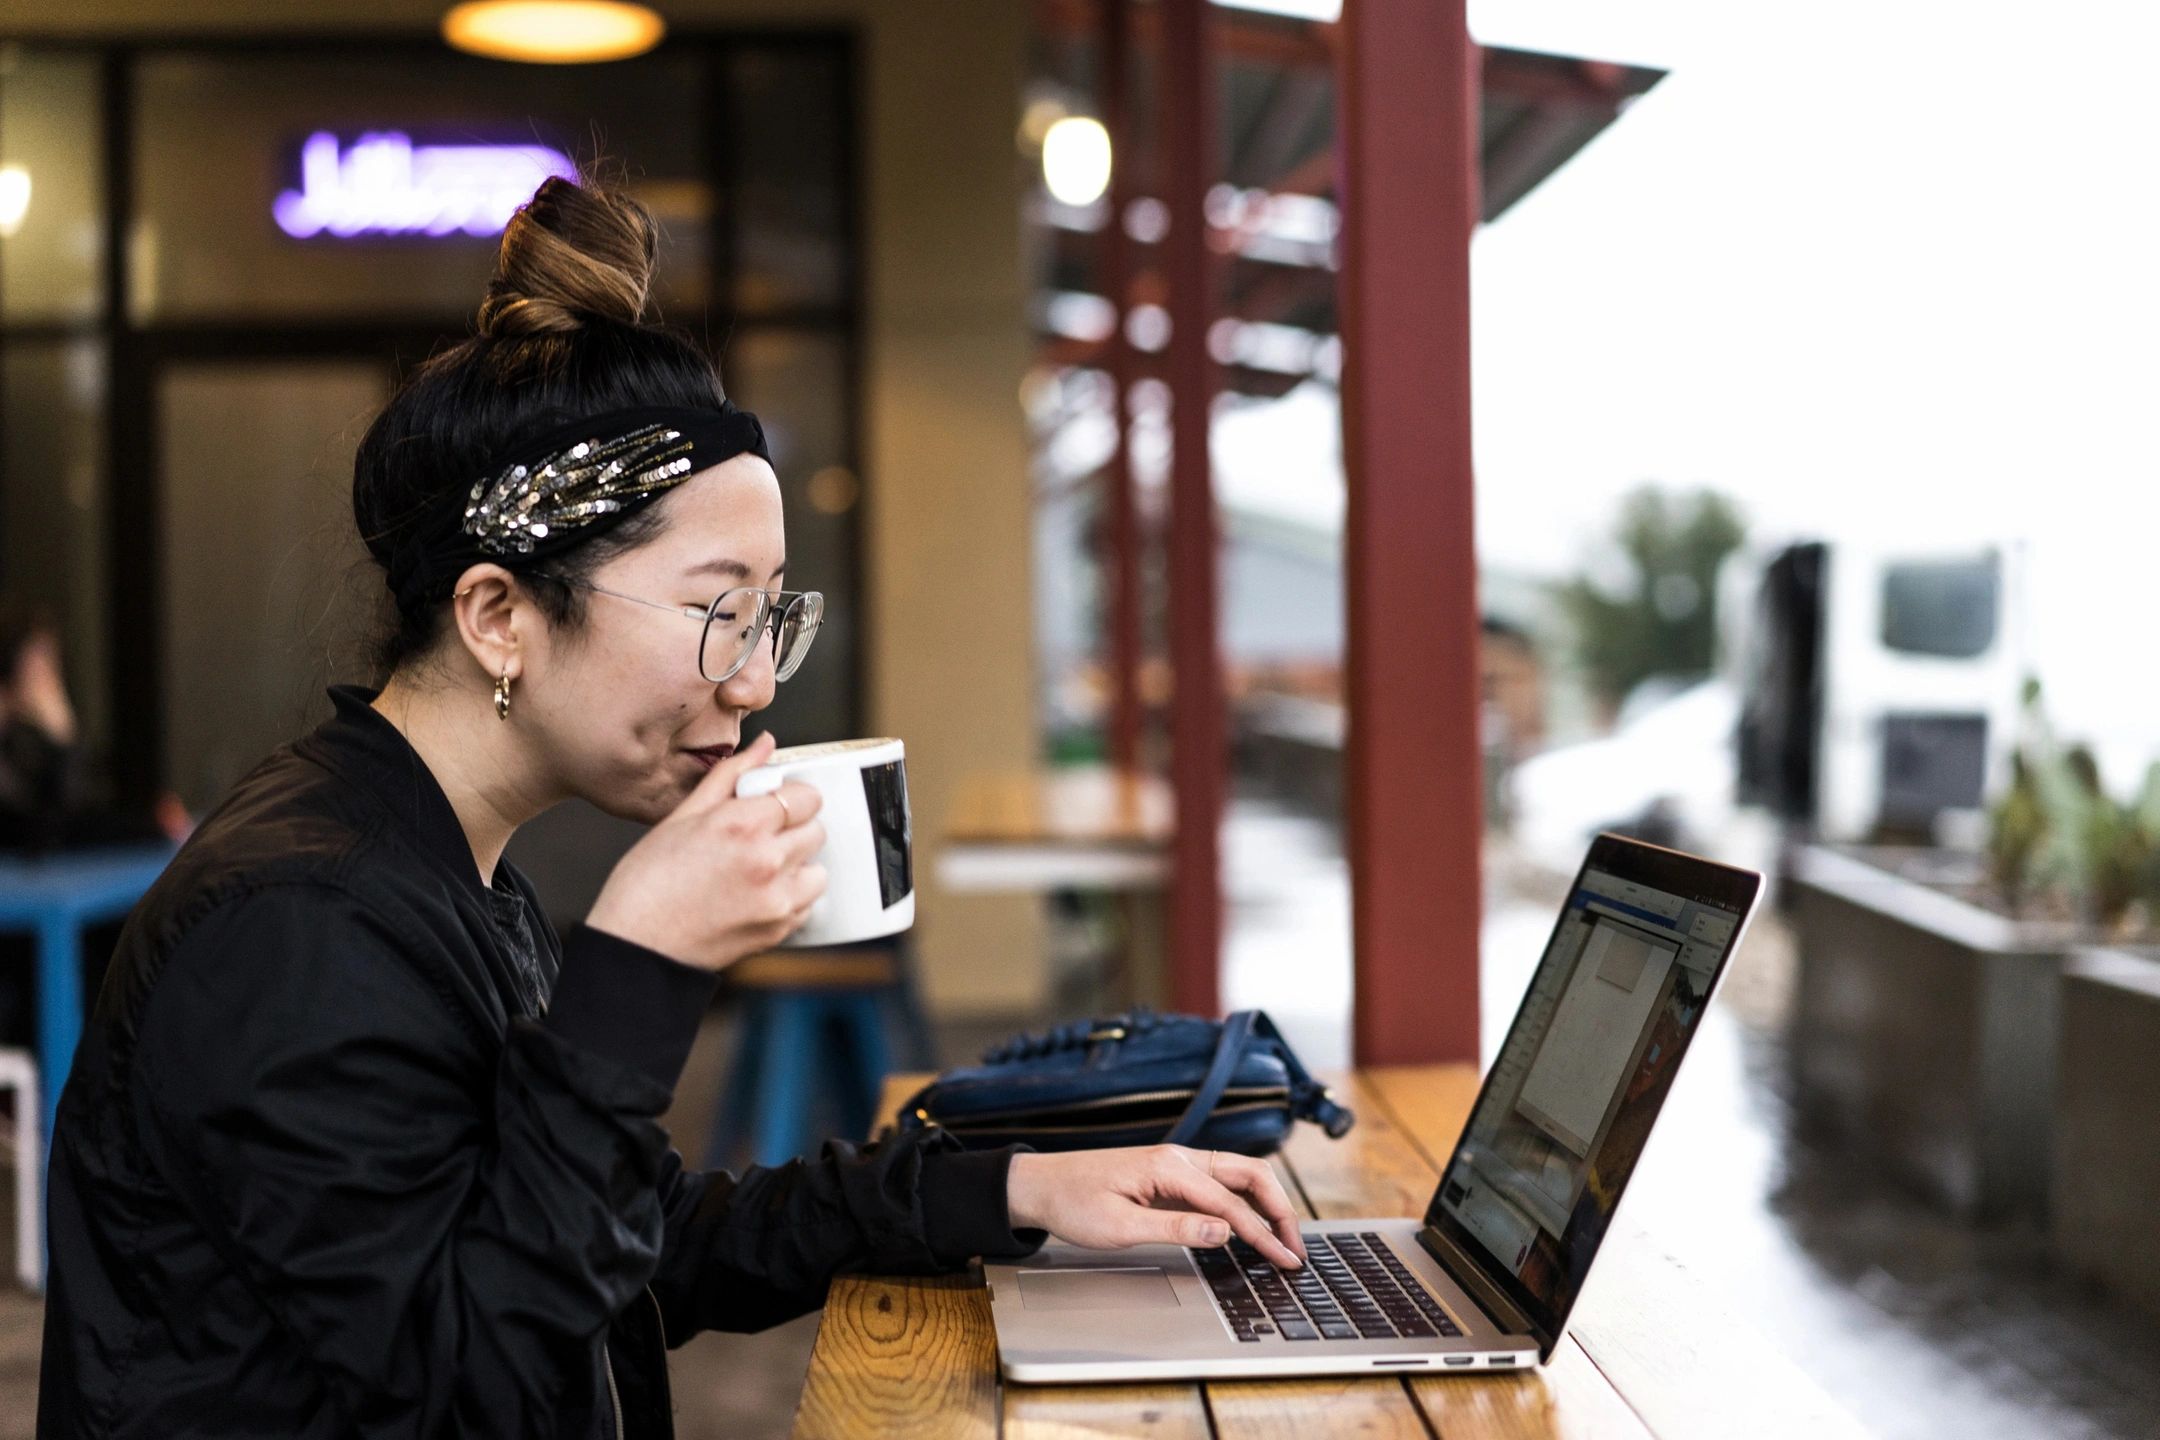 Woman at Laptop Sipping Coffee